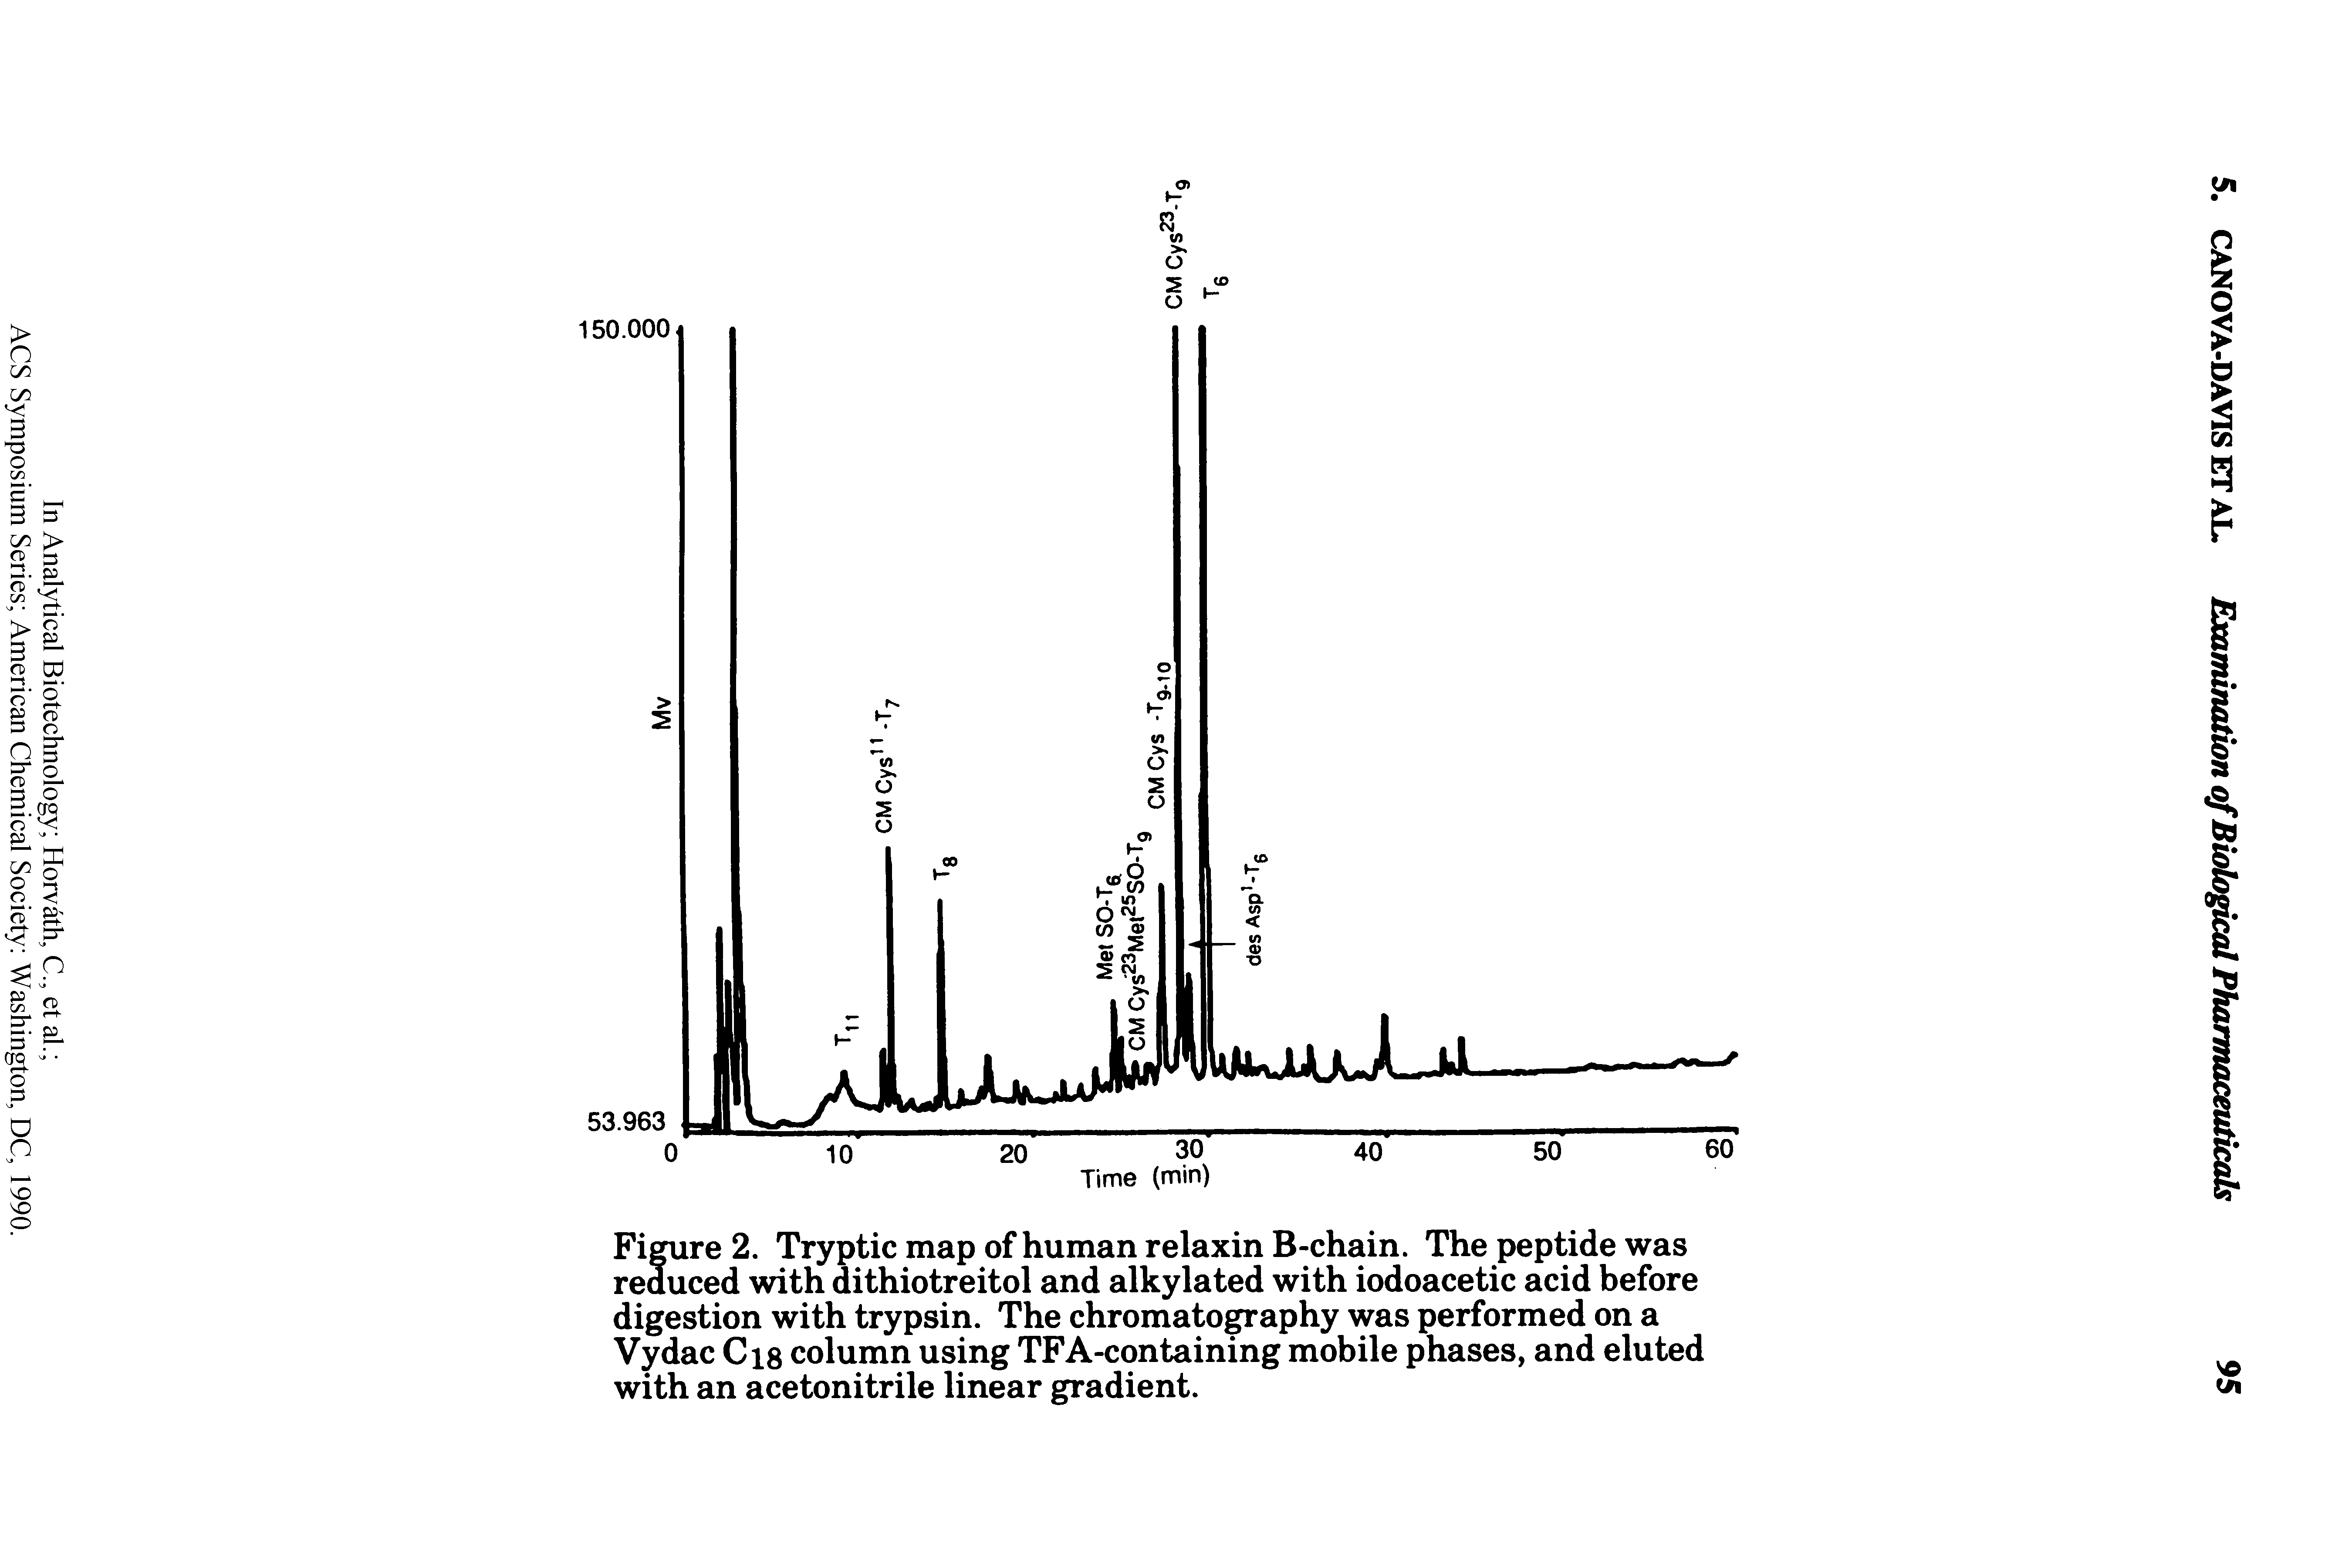 Figure 2. Tryptic map of human relaxin B-chain. The peptide was reduced with dithiotreitol and alkylated with iodoacetic acid before digestion with trypsin. The chromatography was performed on a Vydac Cis column using TFA-containing mobile phases, and eluted with an acetonitrile linear gradient.